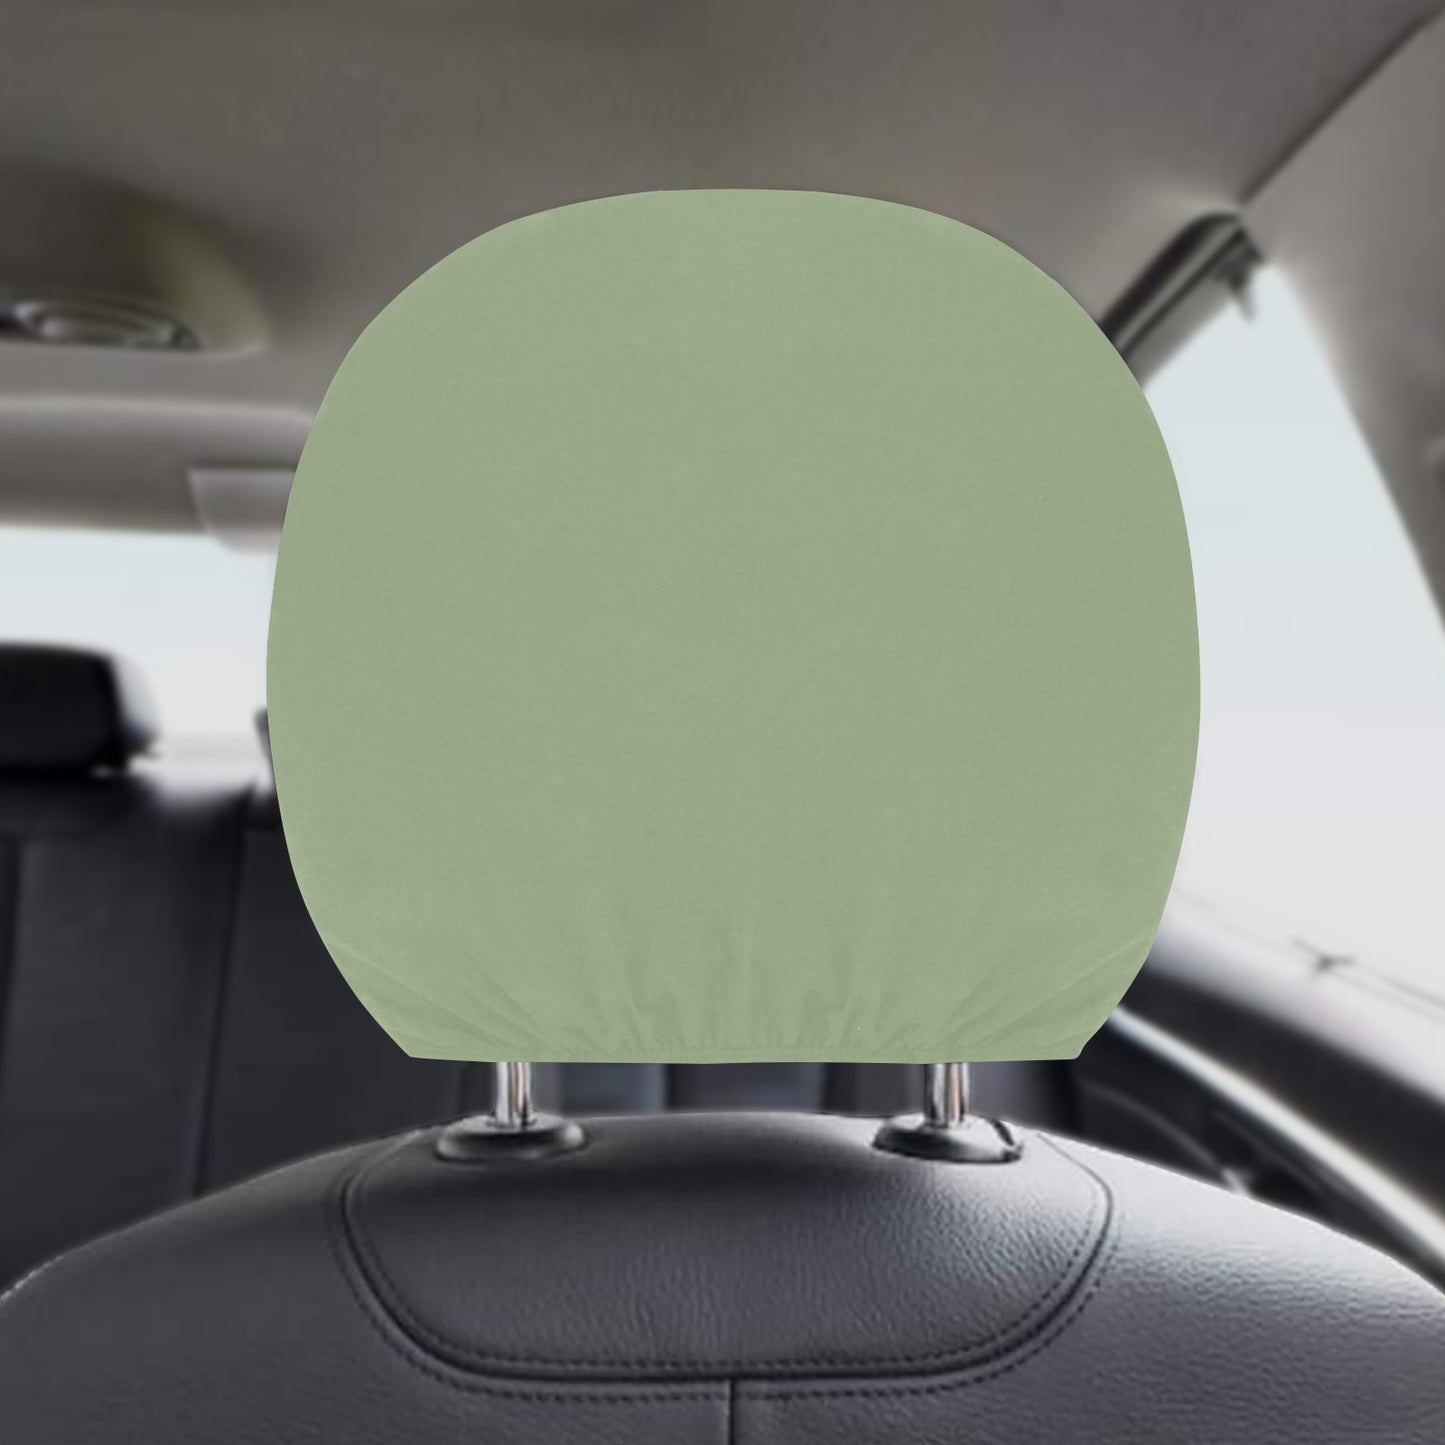 Sage Green Car Seat Headrest Cover (2pcs), Olive Black Truck Suv Van Vehicle Auto Decoration Protector New Car Gift Interior